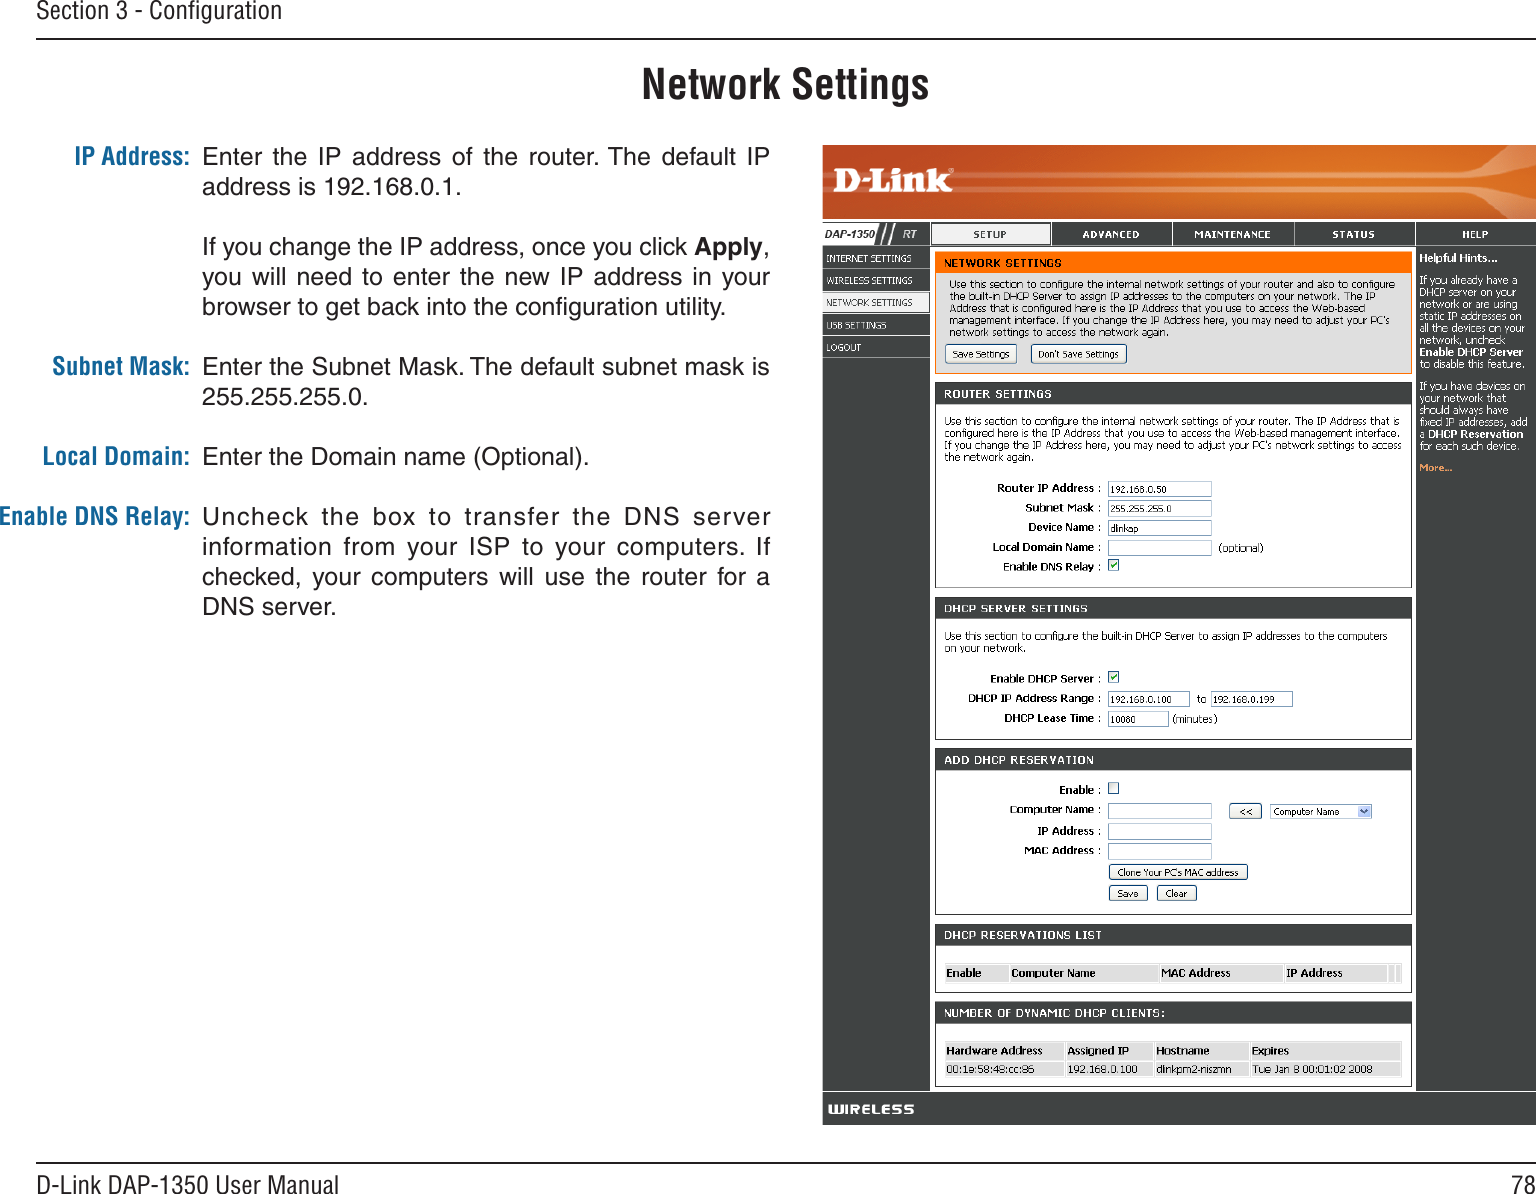 78D-Link DAP-1350 User ManualSection 3 - ConﬁgurationNetwork SettingsEnter  the  IP  address  of  the  router. The  default  IP address is 192.168.0.1.If you change the IP address, once you click Apply, you will need  to enter  the new IP  address  in your browser to get back into the conﬁguration utility.Enter the Subnet Mask. The default subnet mask is 255.255.255.0.Enter the Domain name (Optional).Uncheck the  box  to  transfer  the  DNS  server information  from  your  ISP  to  your  computers.  If checked,  your  computers  will  use  the  router  for  a DNS server.IP Address:Subnet Mask:Local Domain:Enable DNS Relay: